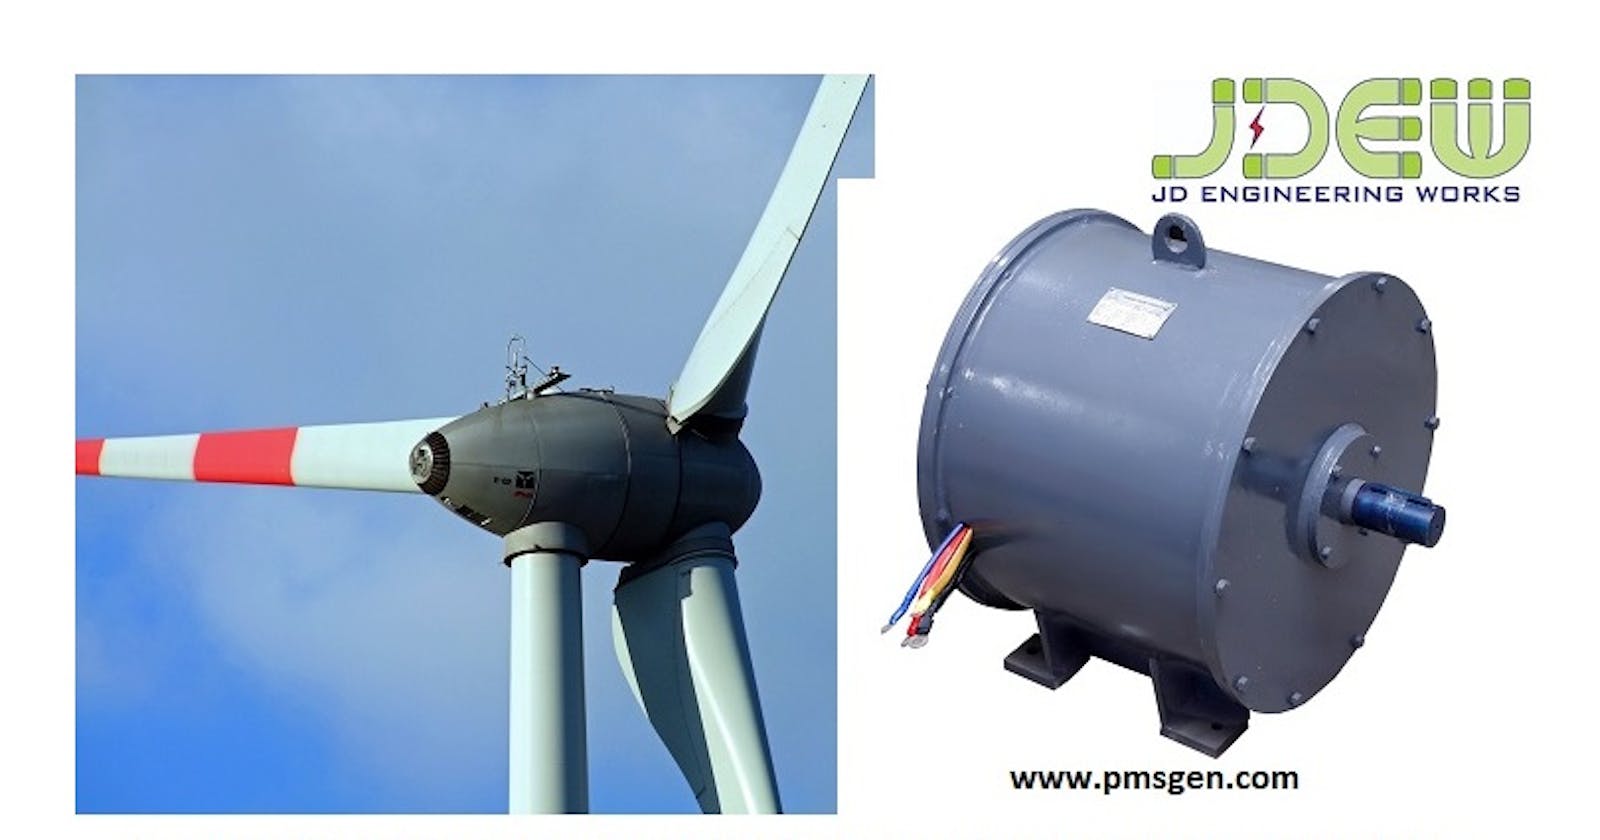 Prominent Manufacturer and Supplier of Wind Turbine Generator in India